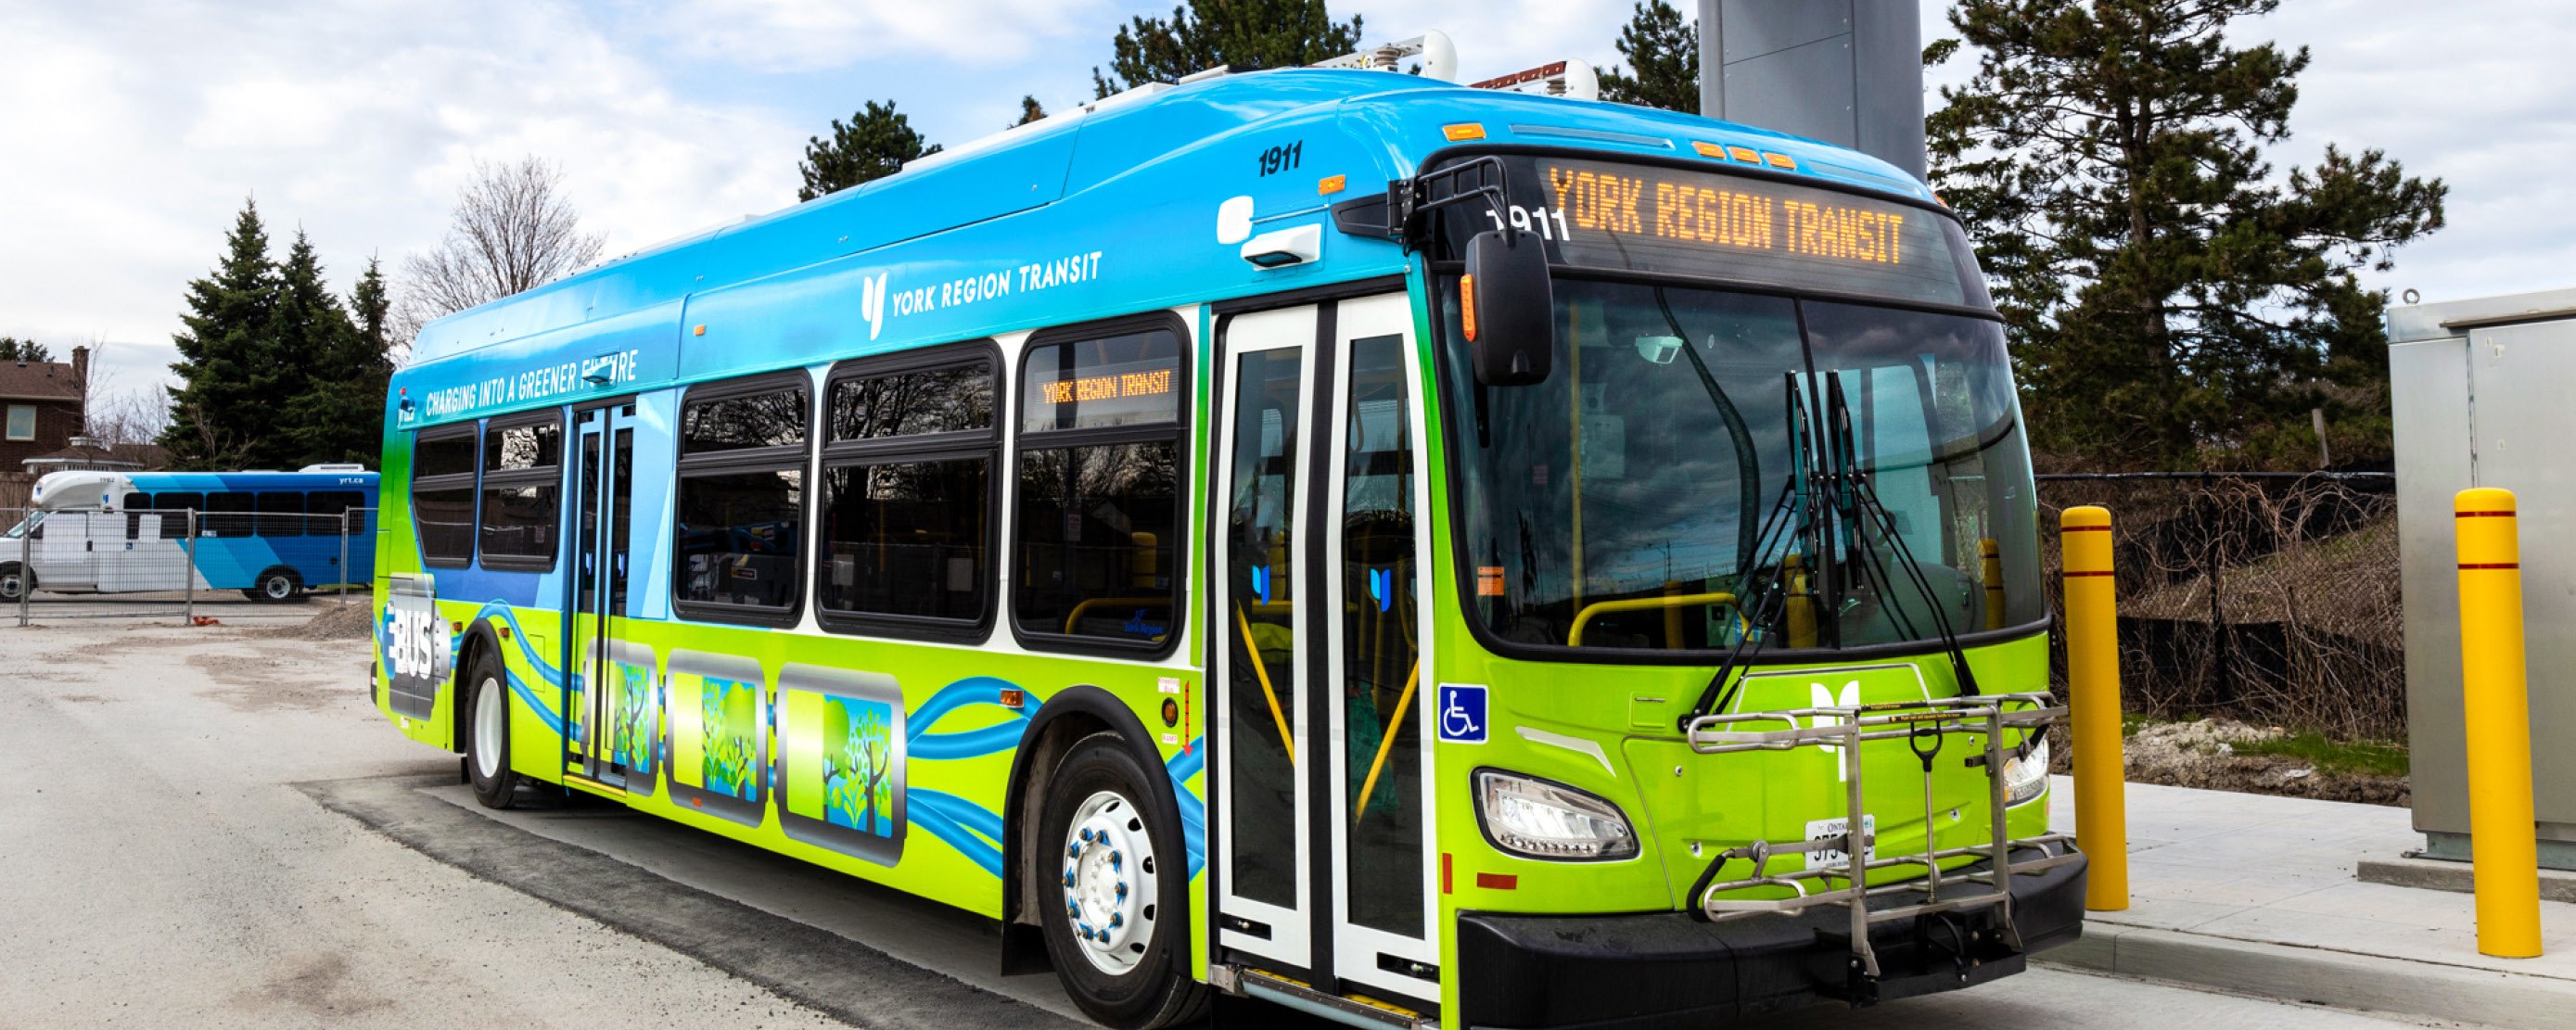 image of the YRT electric bus